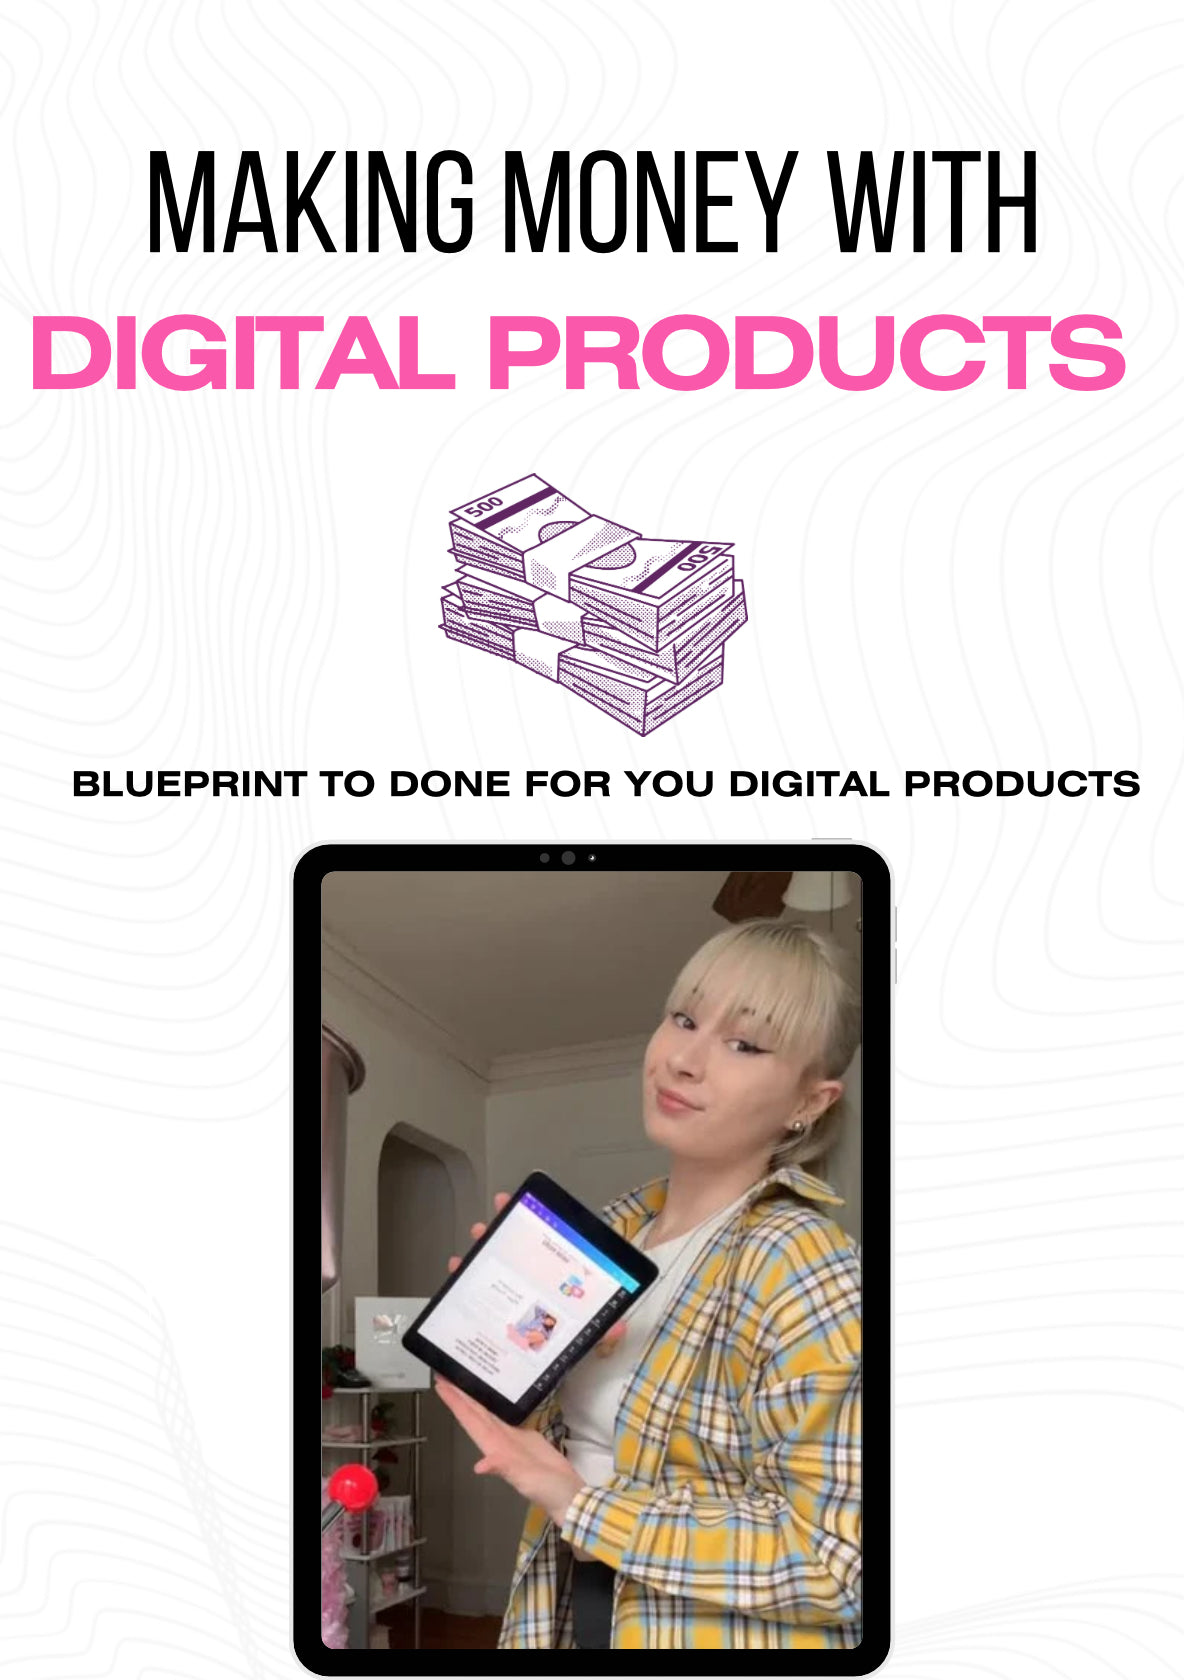 Making money with digital products (FREE GUIDE)